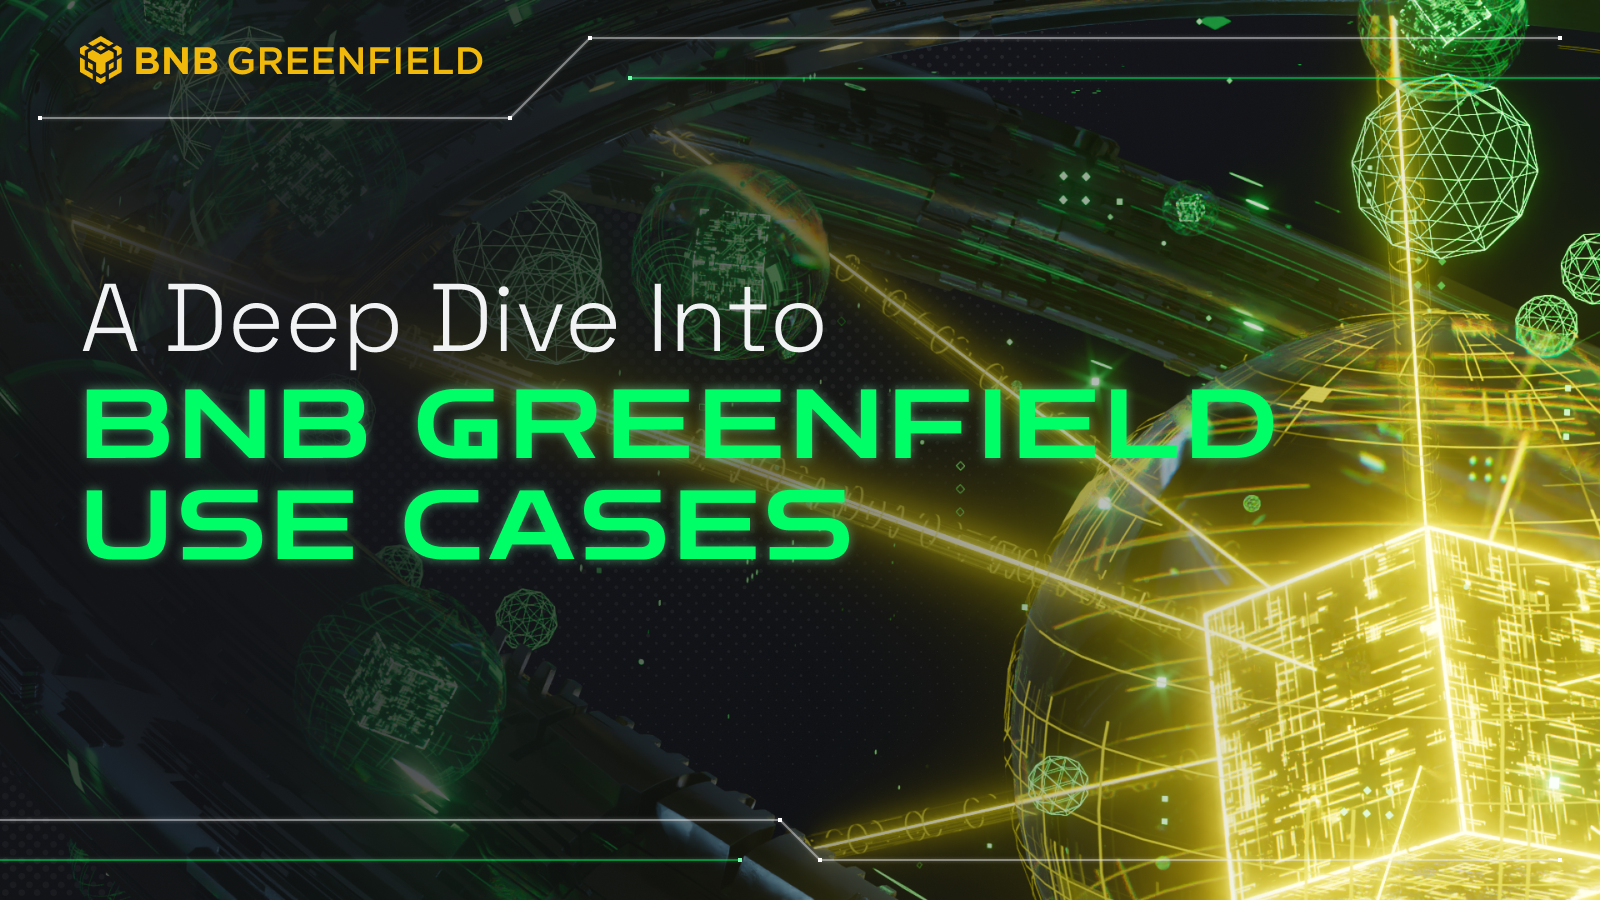 A Deep Dive Into BNB Greenfield Use Cases